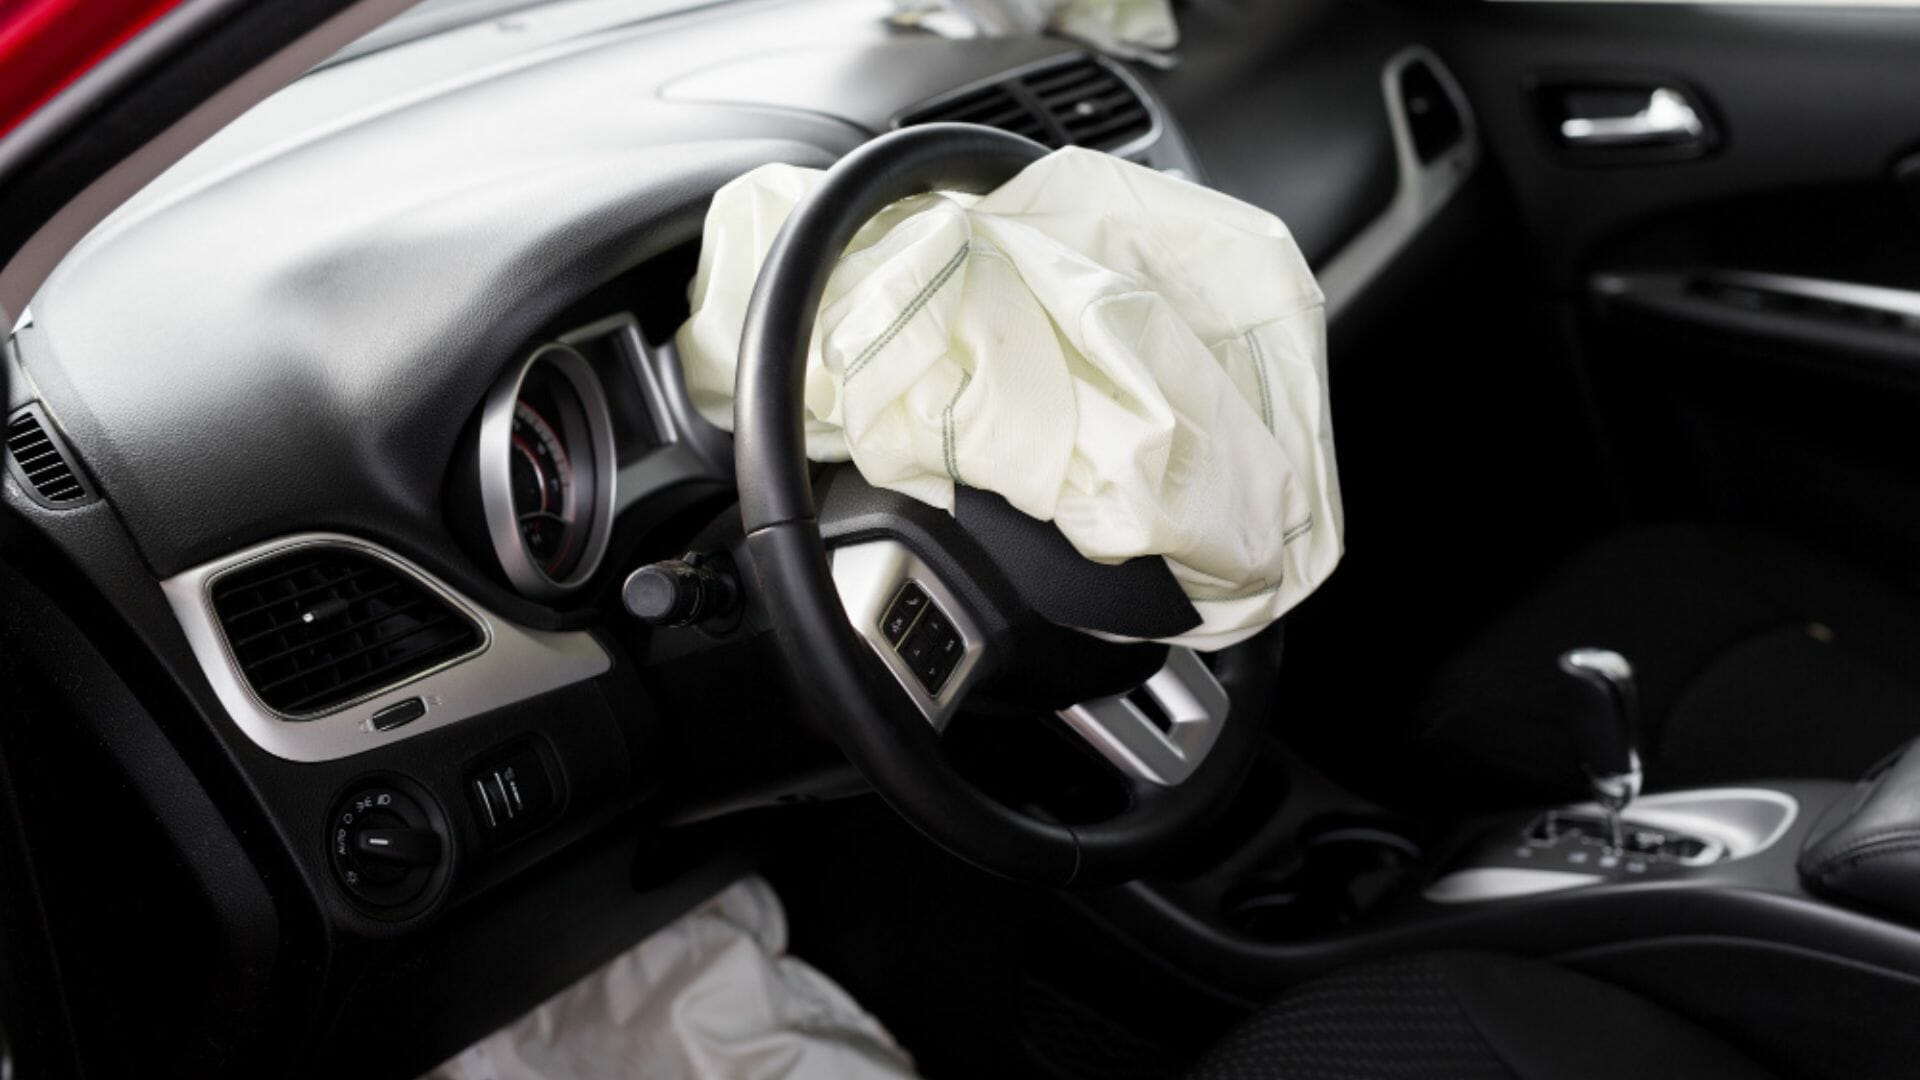 airbag injuries to arms